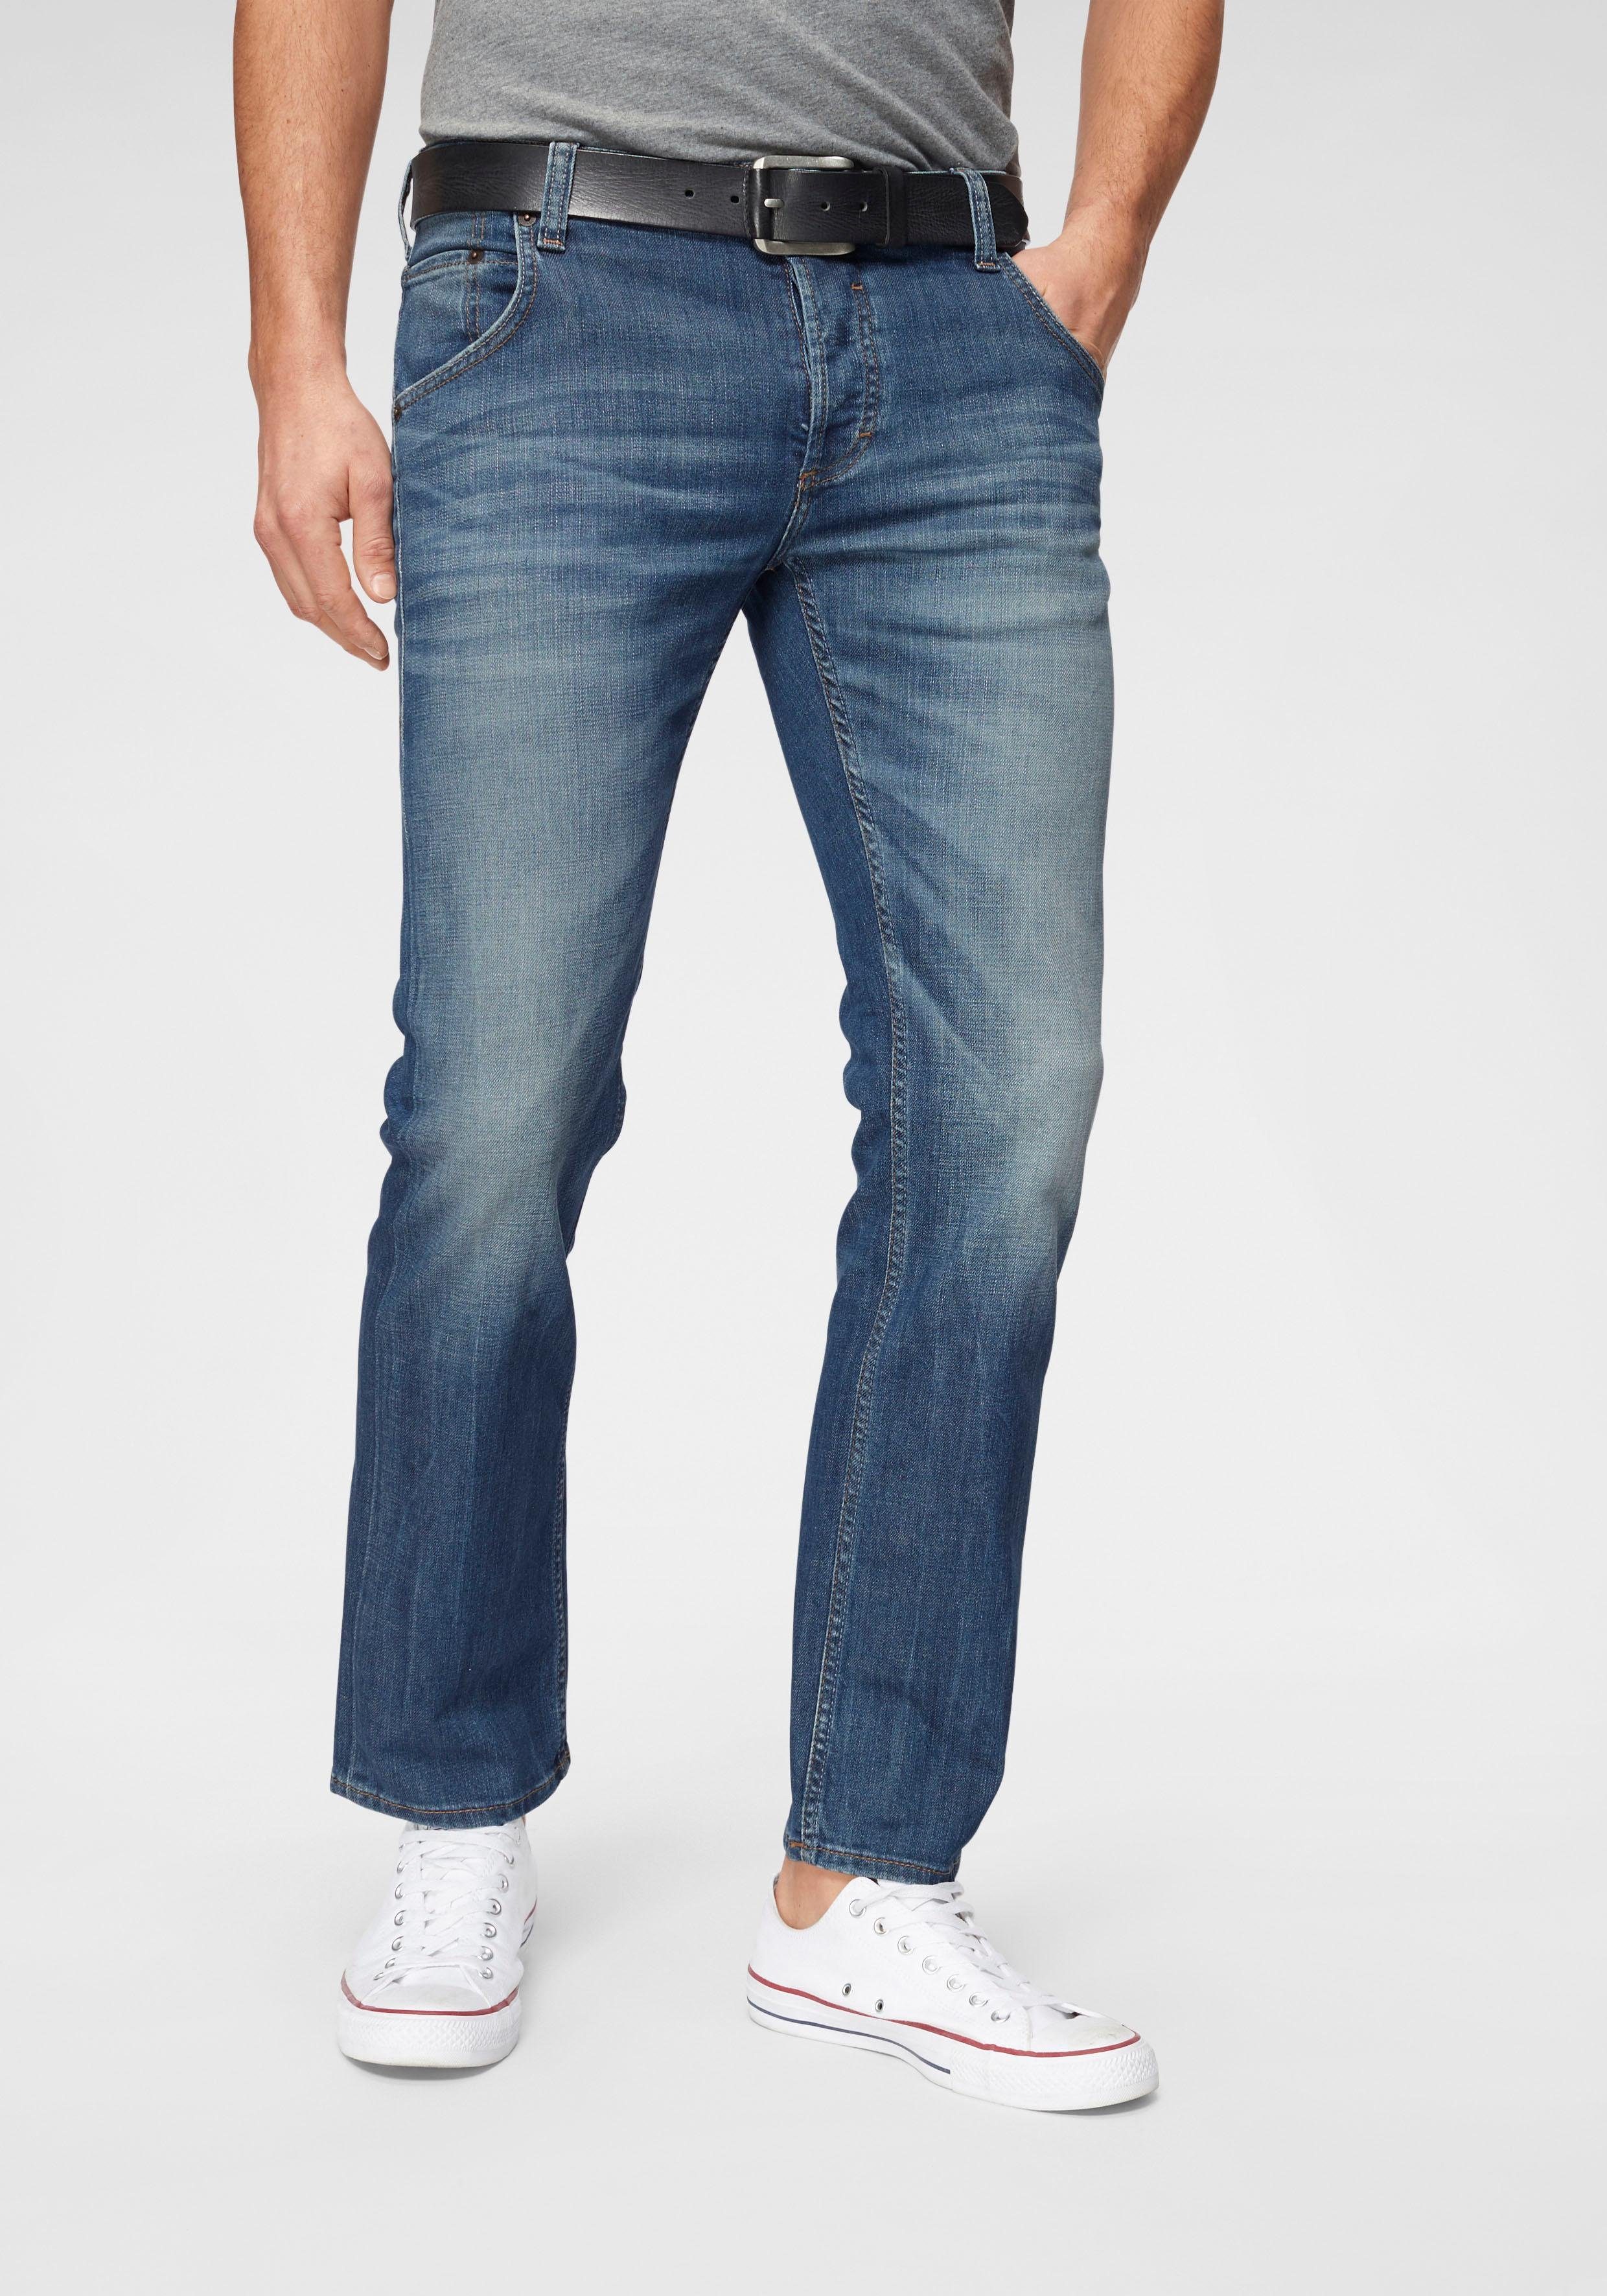 MUSTANG Straight-Jeans STYLE MICHIGAN STRAIGHT in 5-Pocket-Form light-scratched-used | Stretchjeans